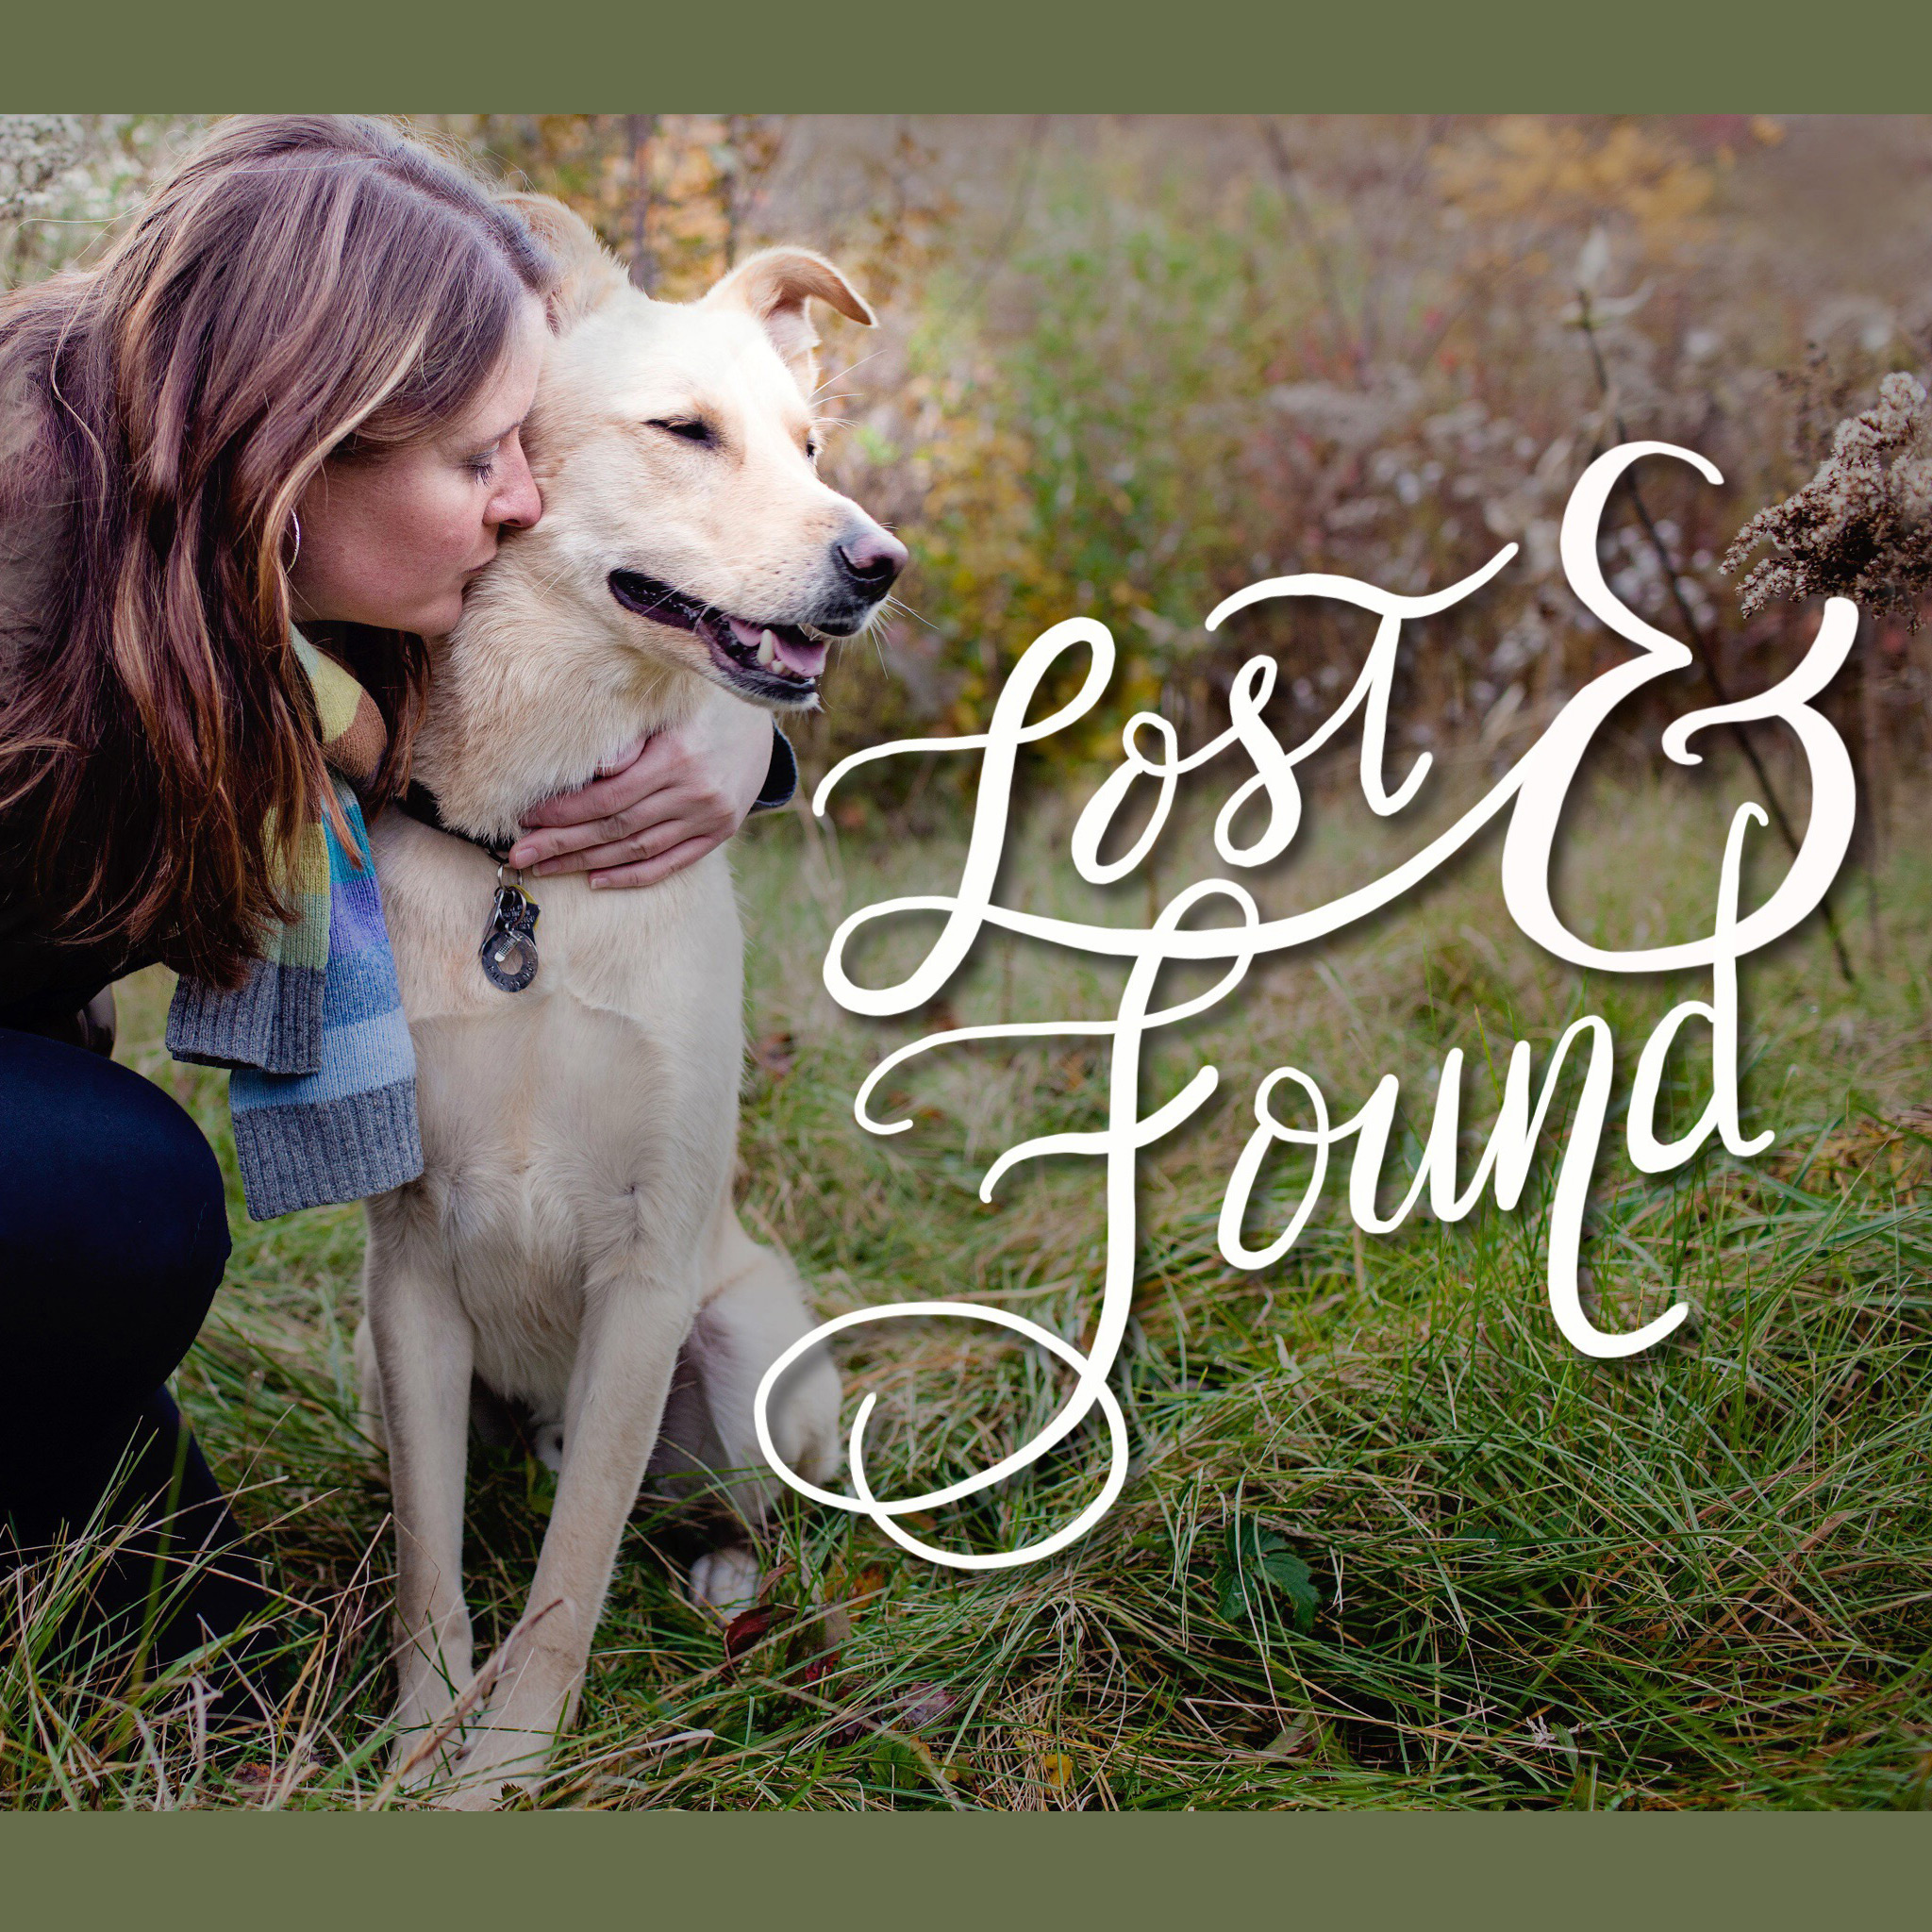 Photography project by Ontario pet photographer will tell the stories of rescue pets and their people.